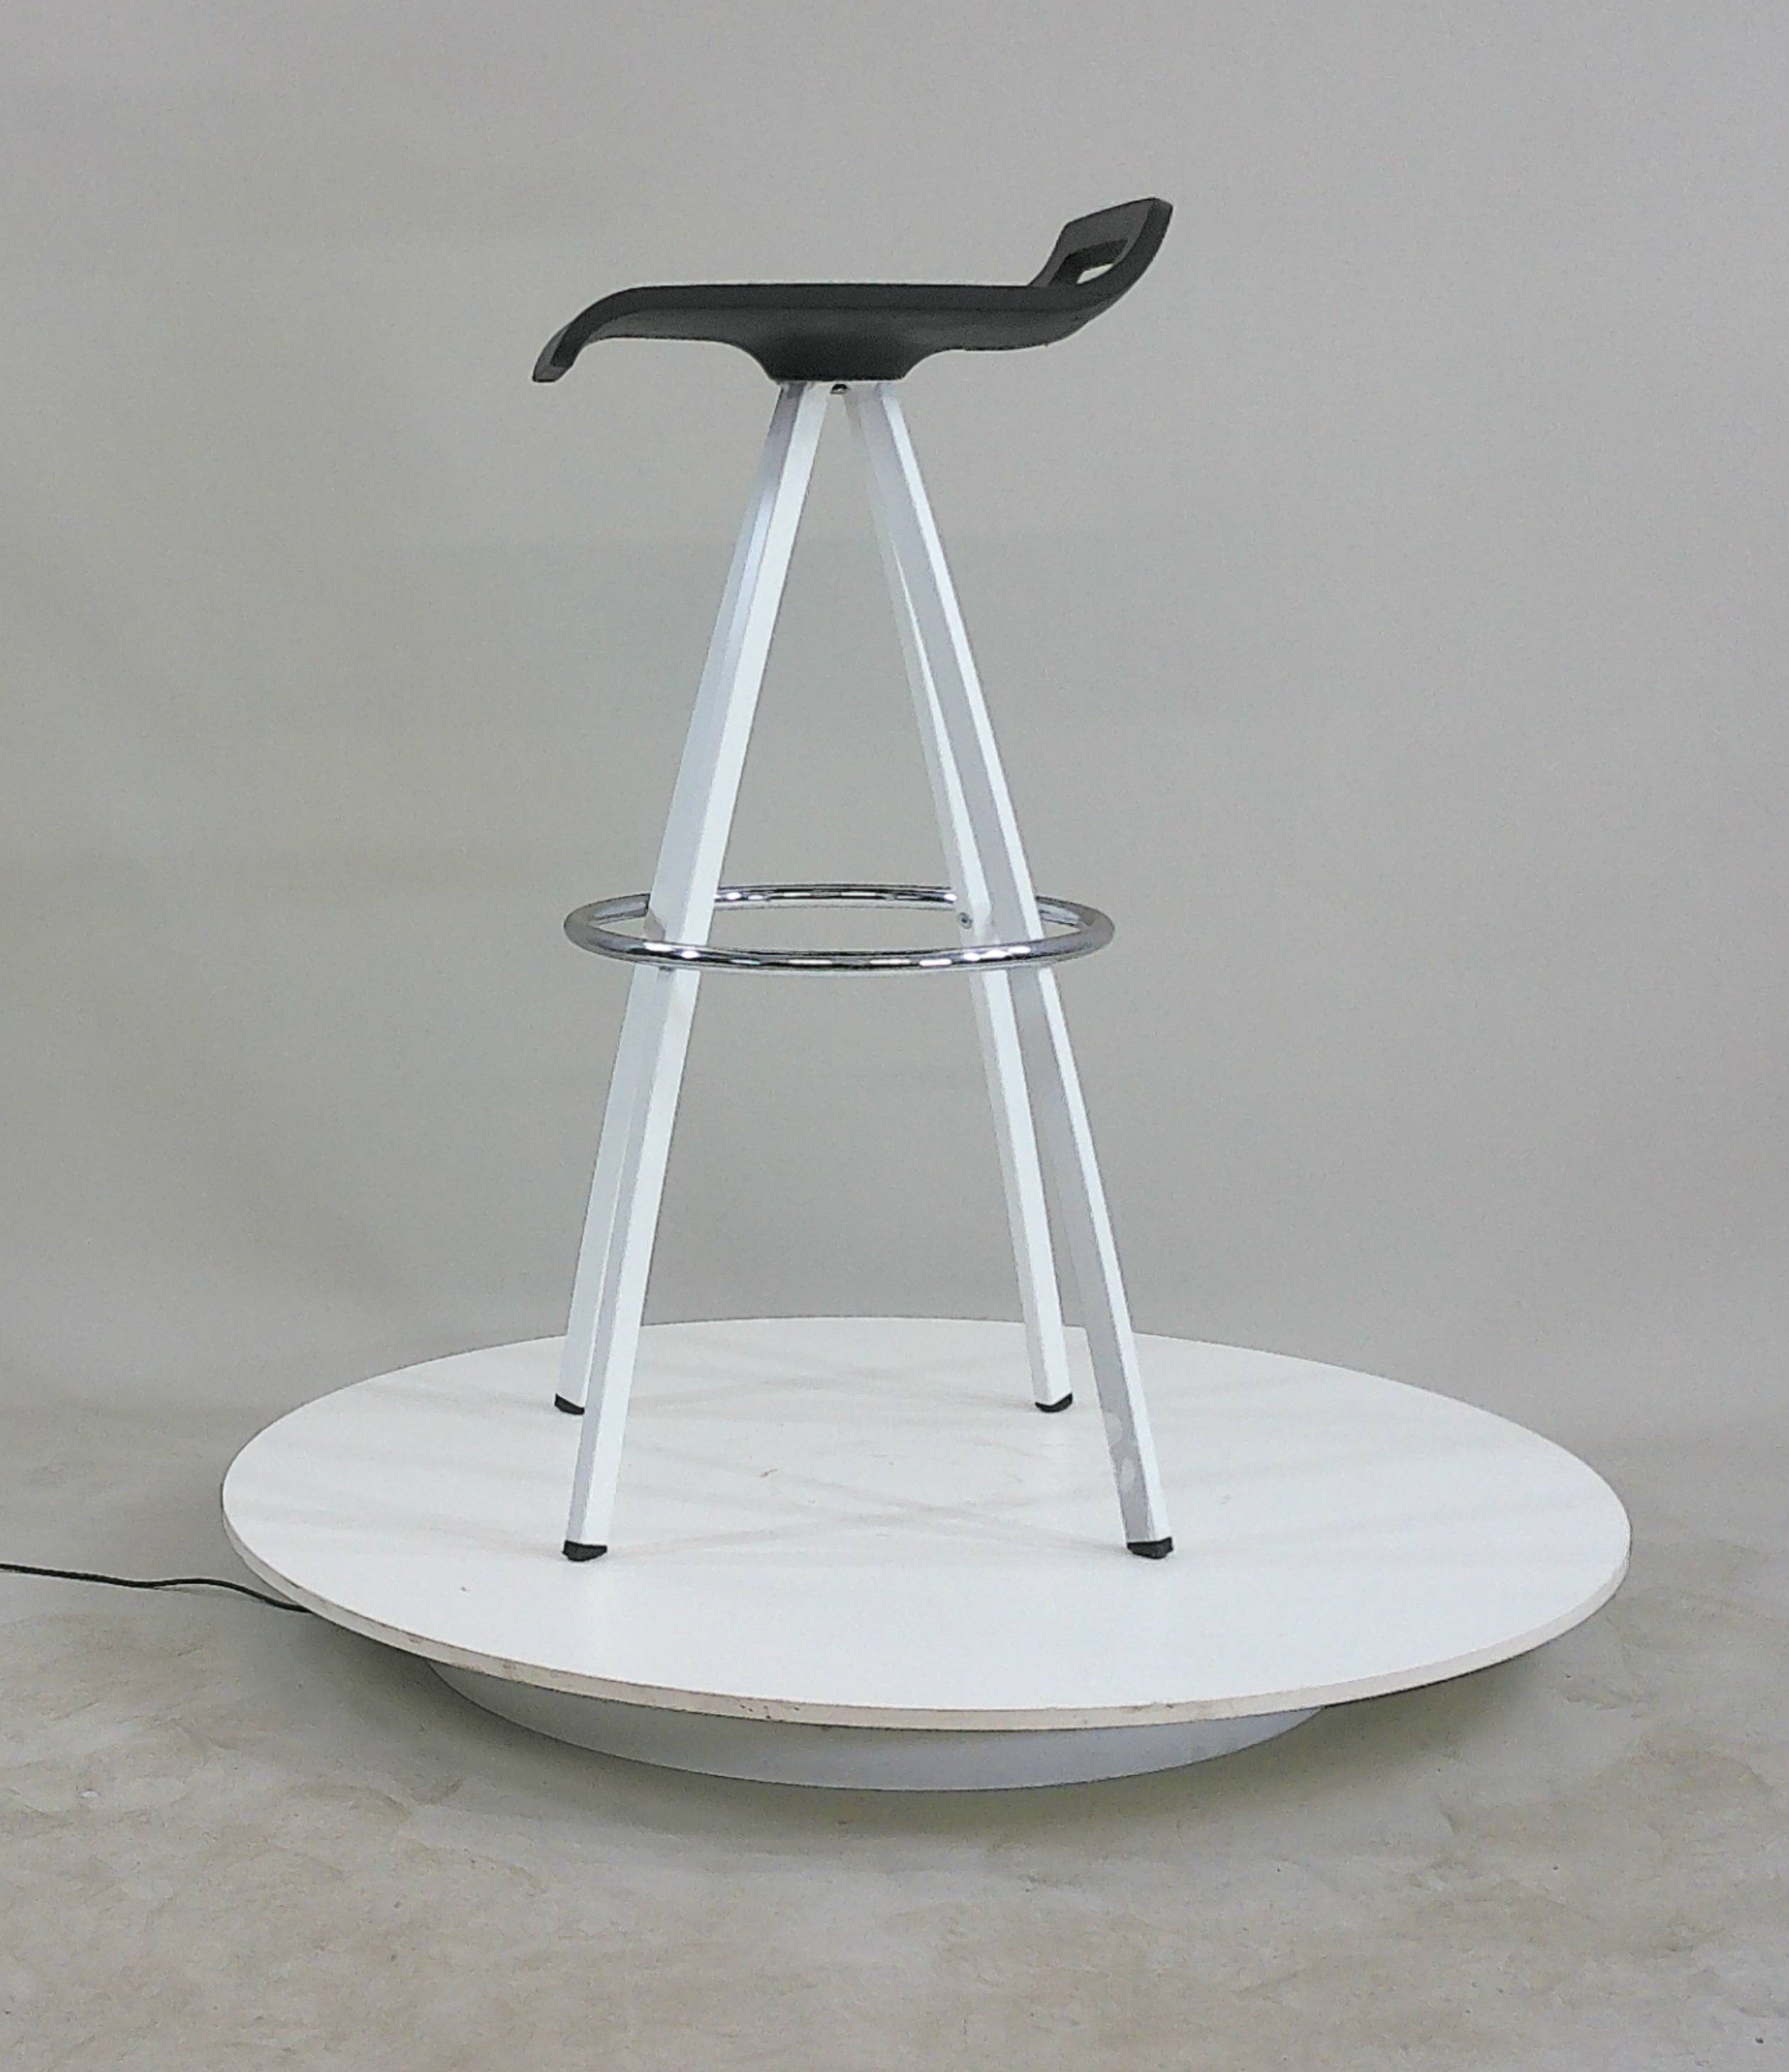 Bar stool sitting on a grey back ground with white powder coated 4 leg base and black seat with low back and photographed side on